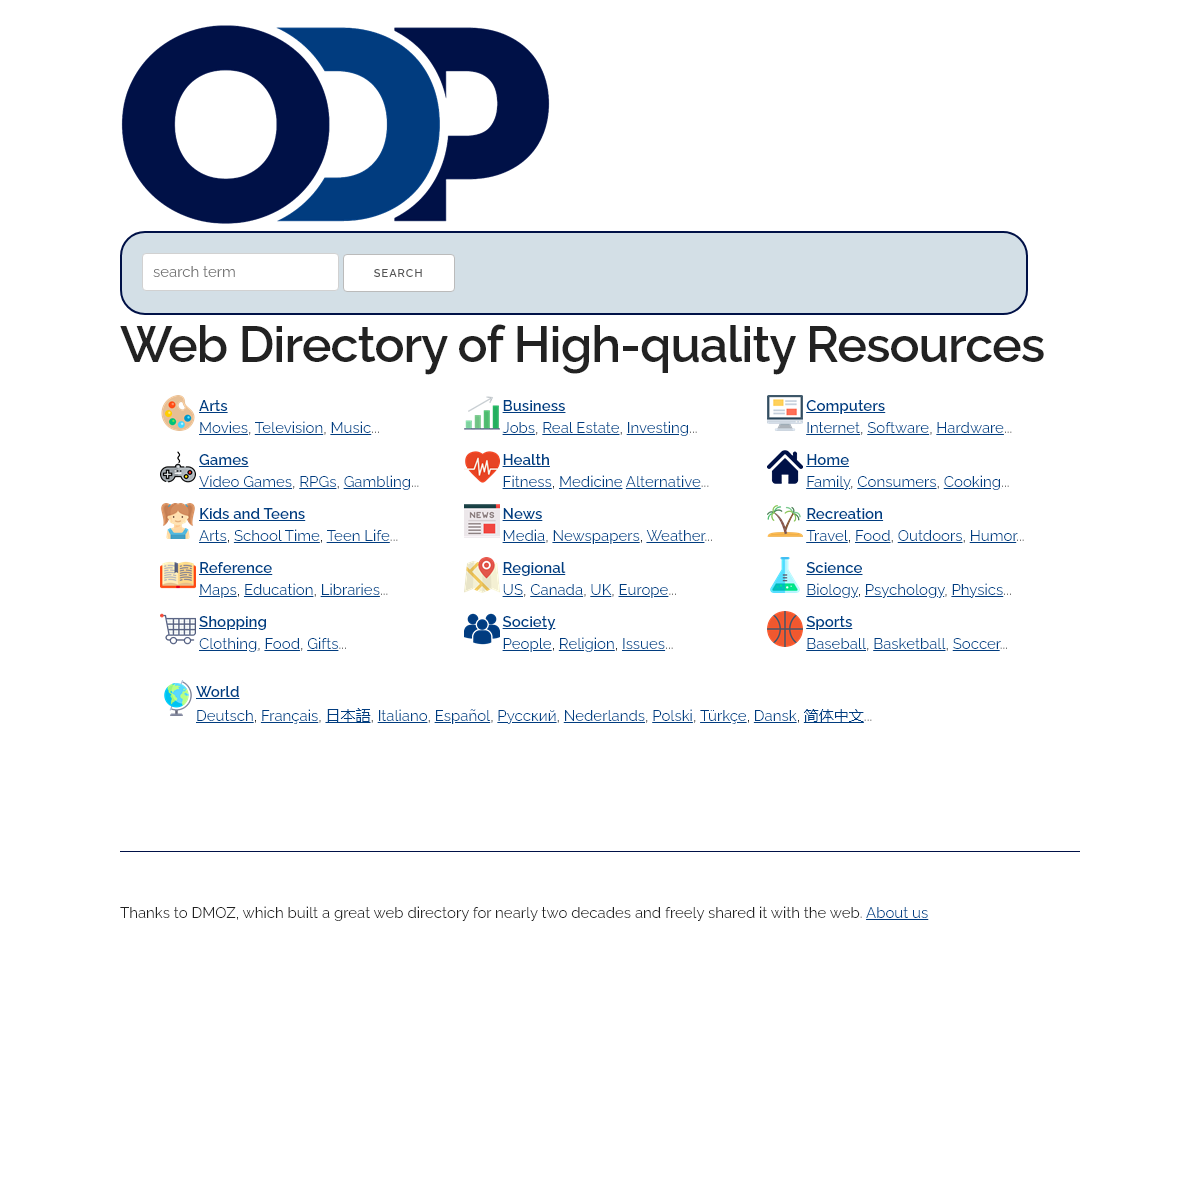 A complete backup of odp.org